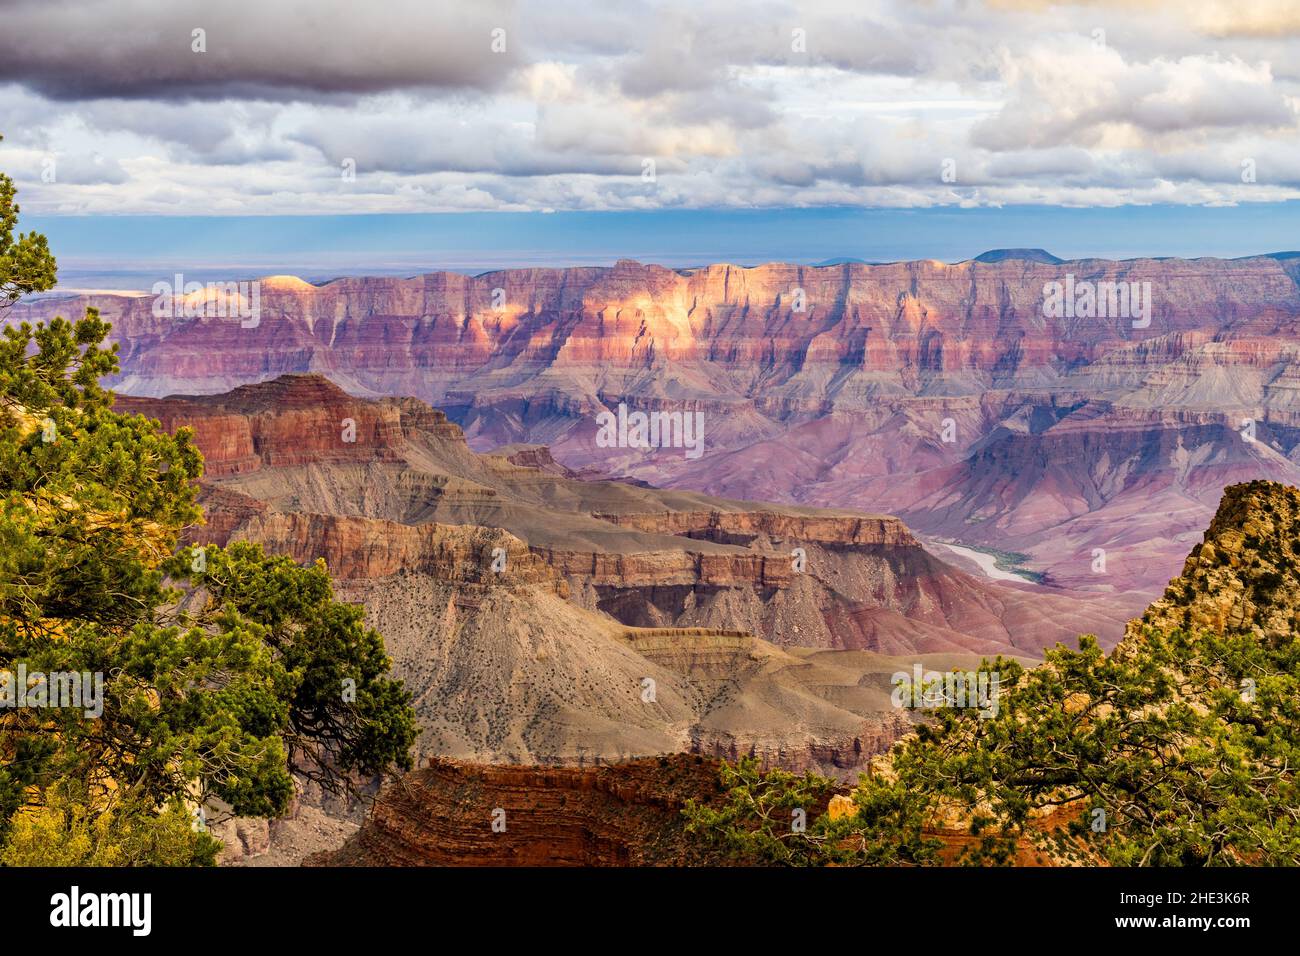 Grand Canyon with Colorado River in distance white clouds overhead and ...